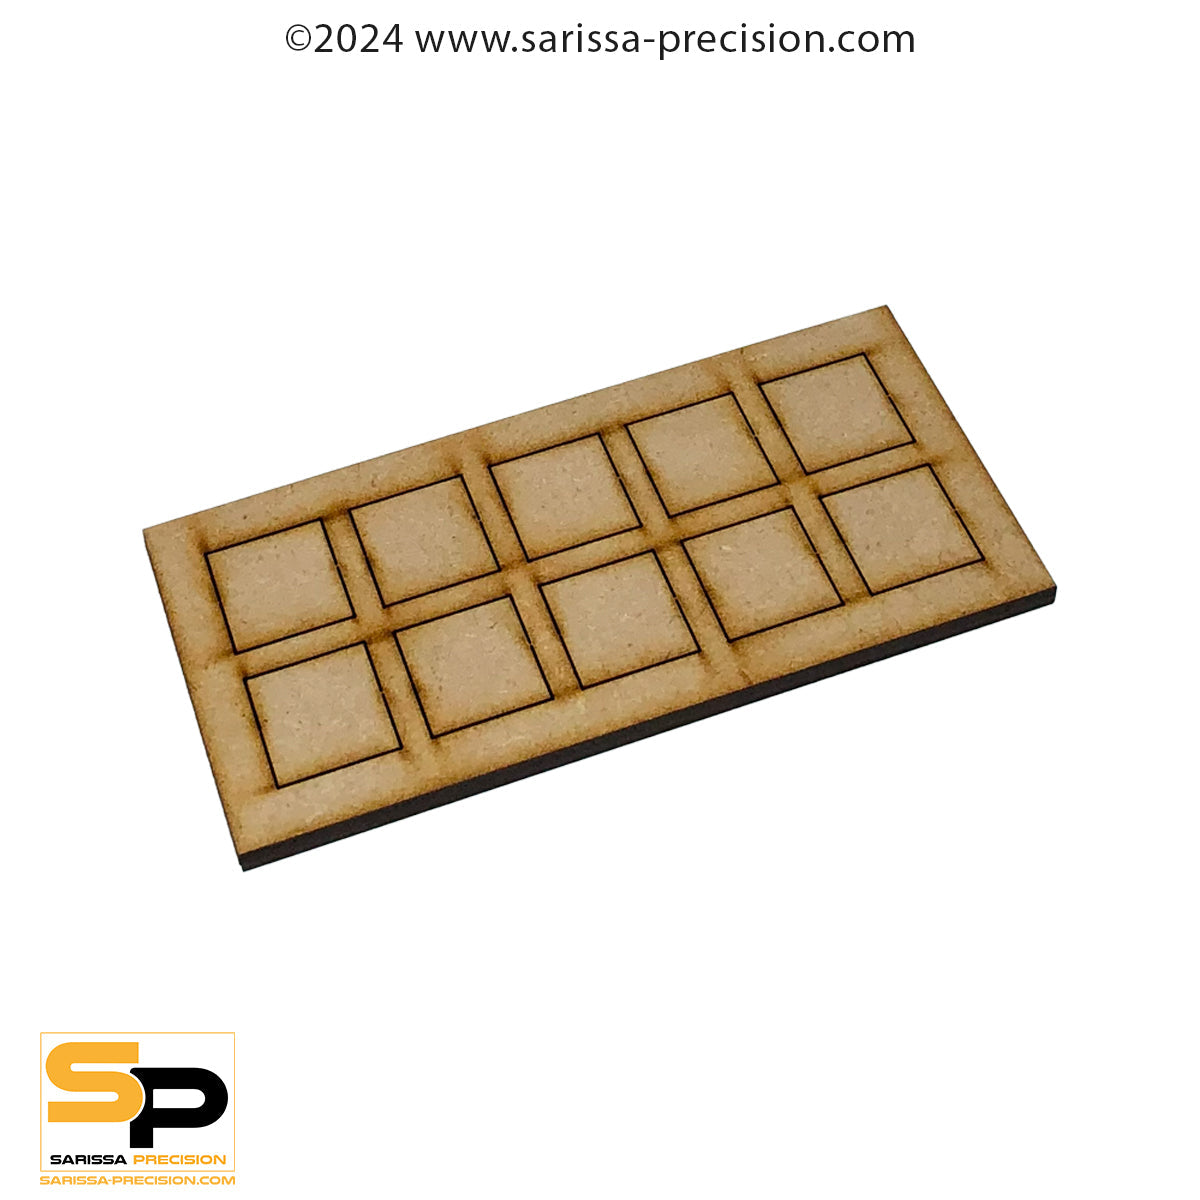 12 x 2 25x25mm Conversion Tray for 20x20mm bases